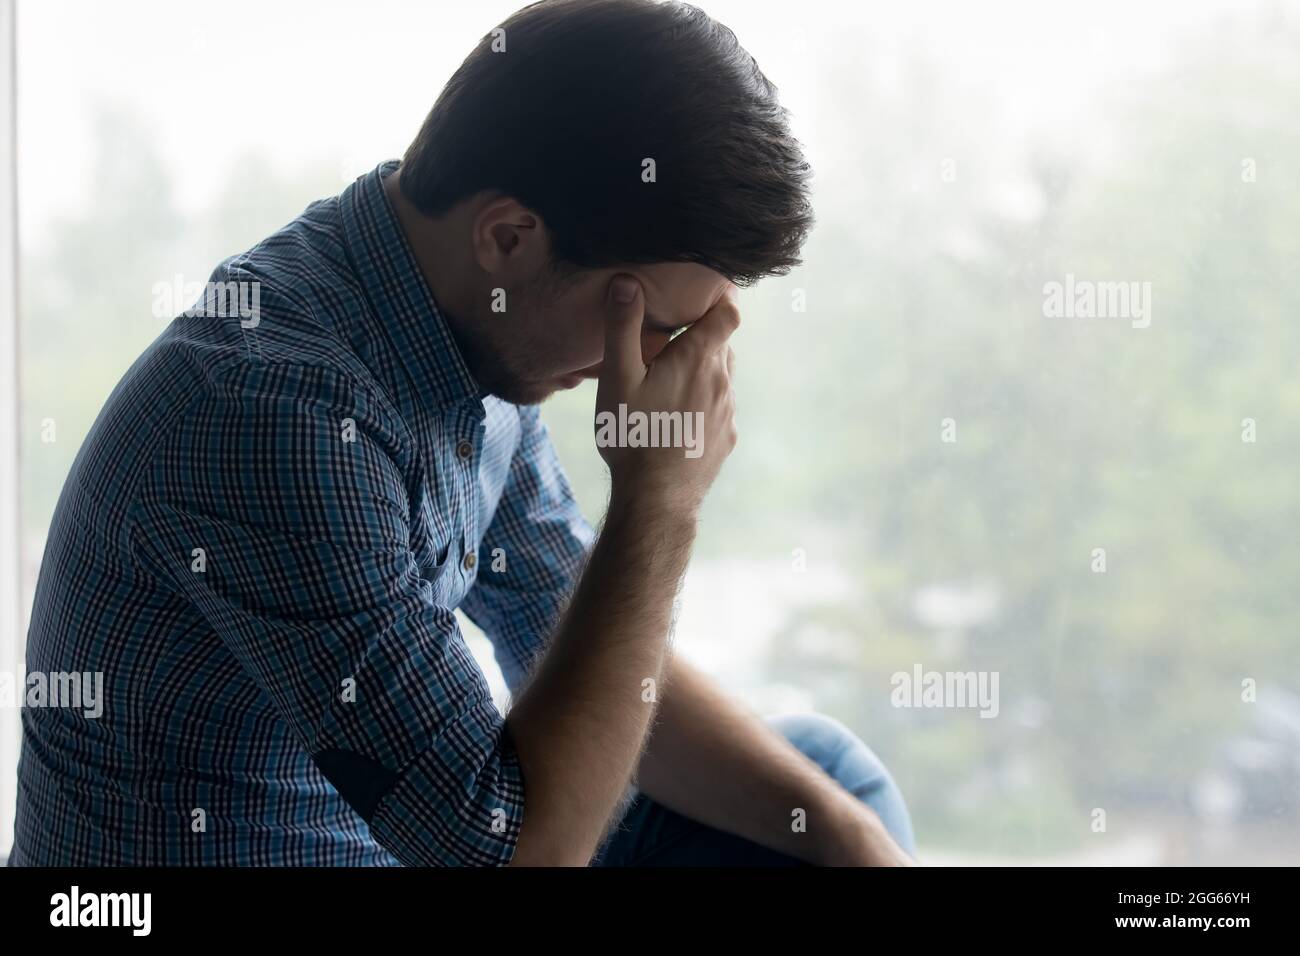 Depressed frustrated millennial man touching head, covering face Stock Photo